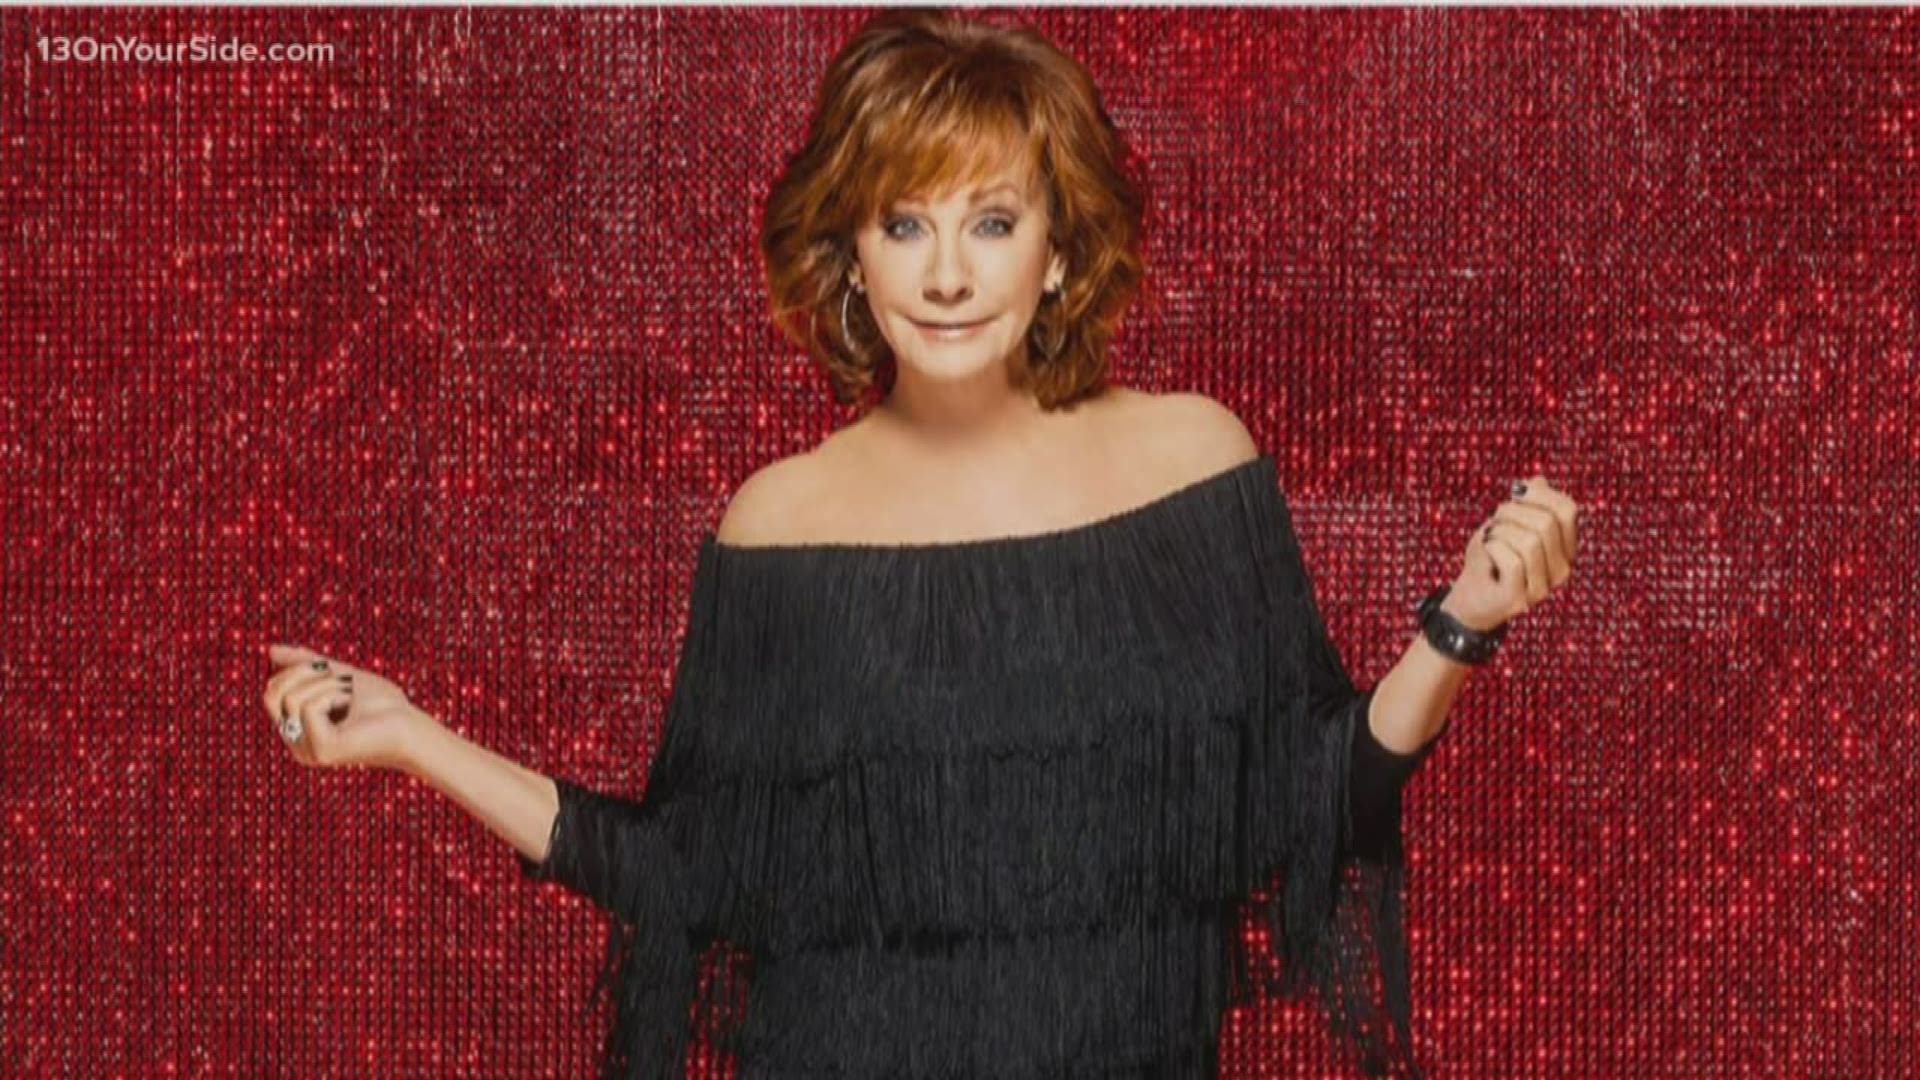 Stars like Reba McEntire, Michael Buble, Elton John and more are taking over the Van Andel Arena. Here's a rundown of everything you need to know.